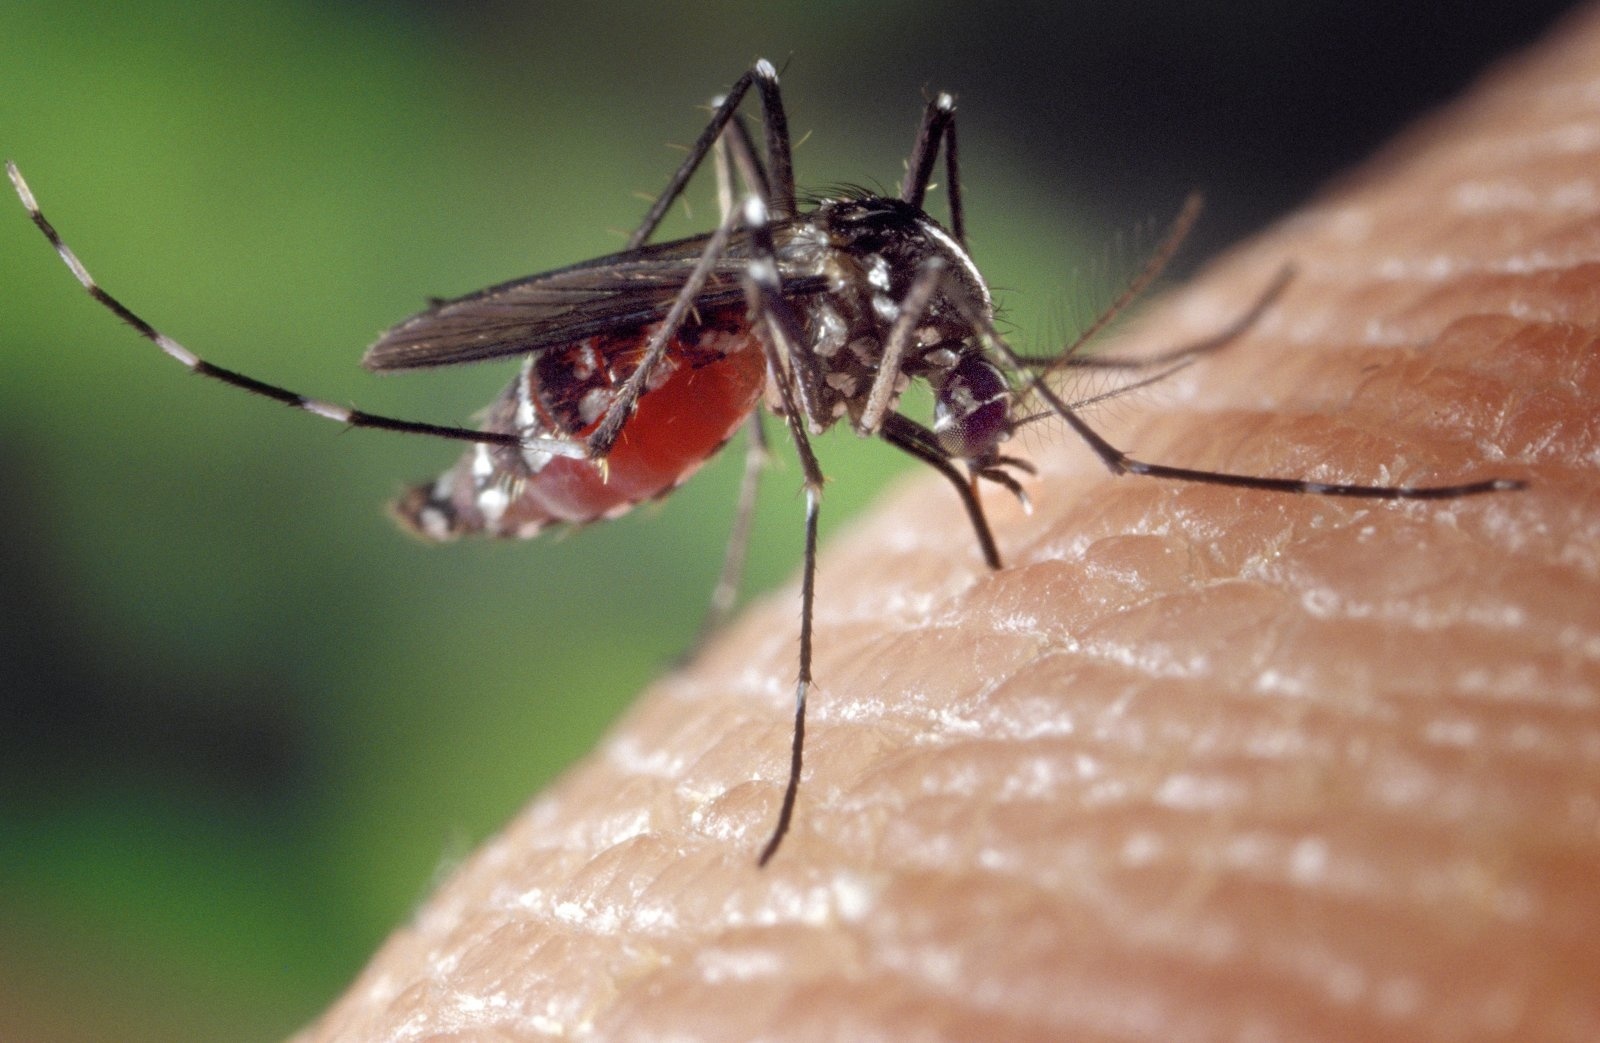 EPA approves ‘good guy’ mosquitoes to battle Zika